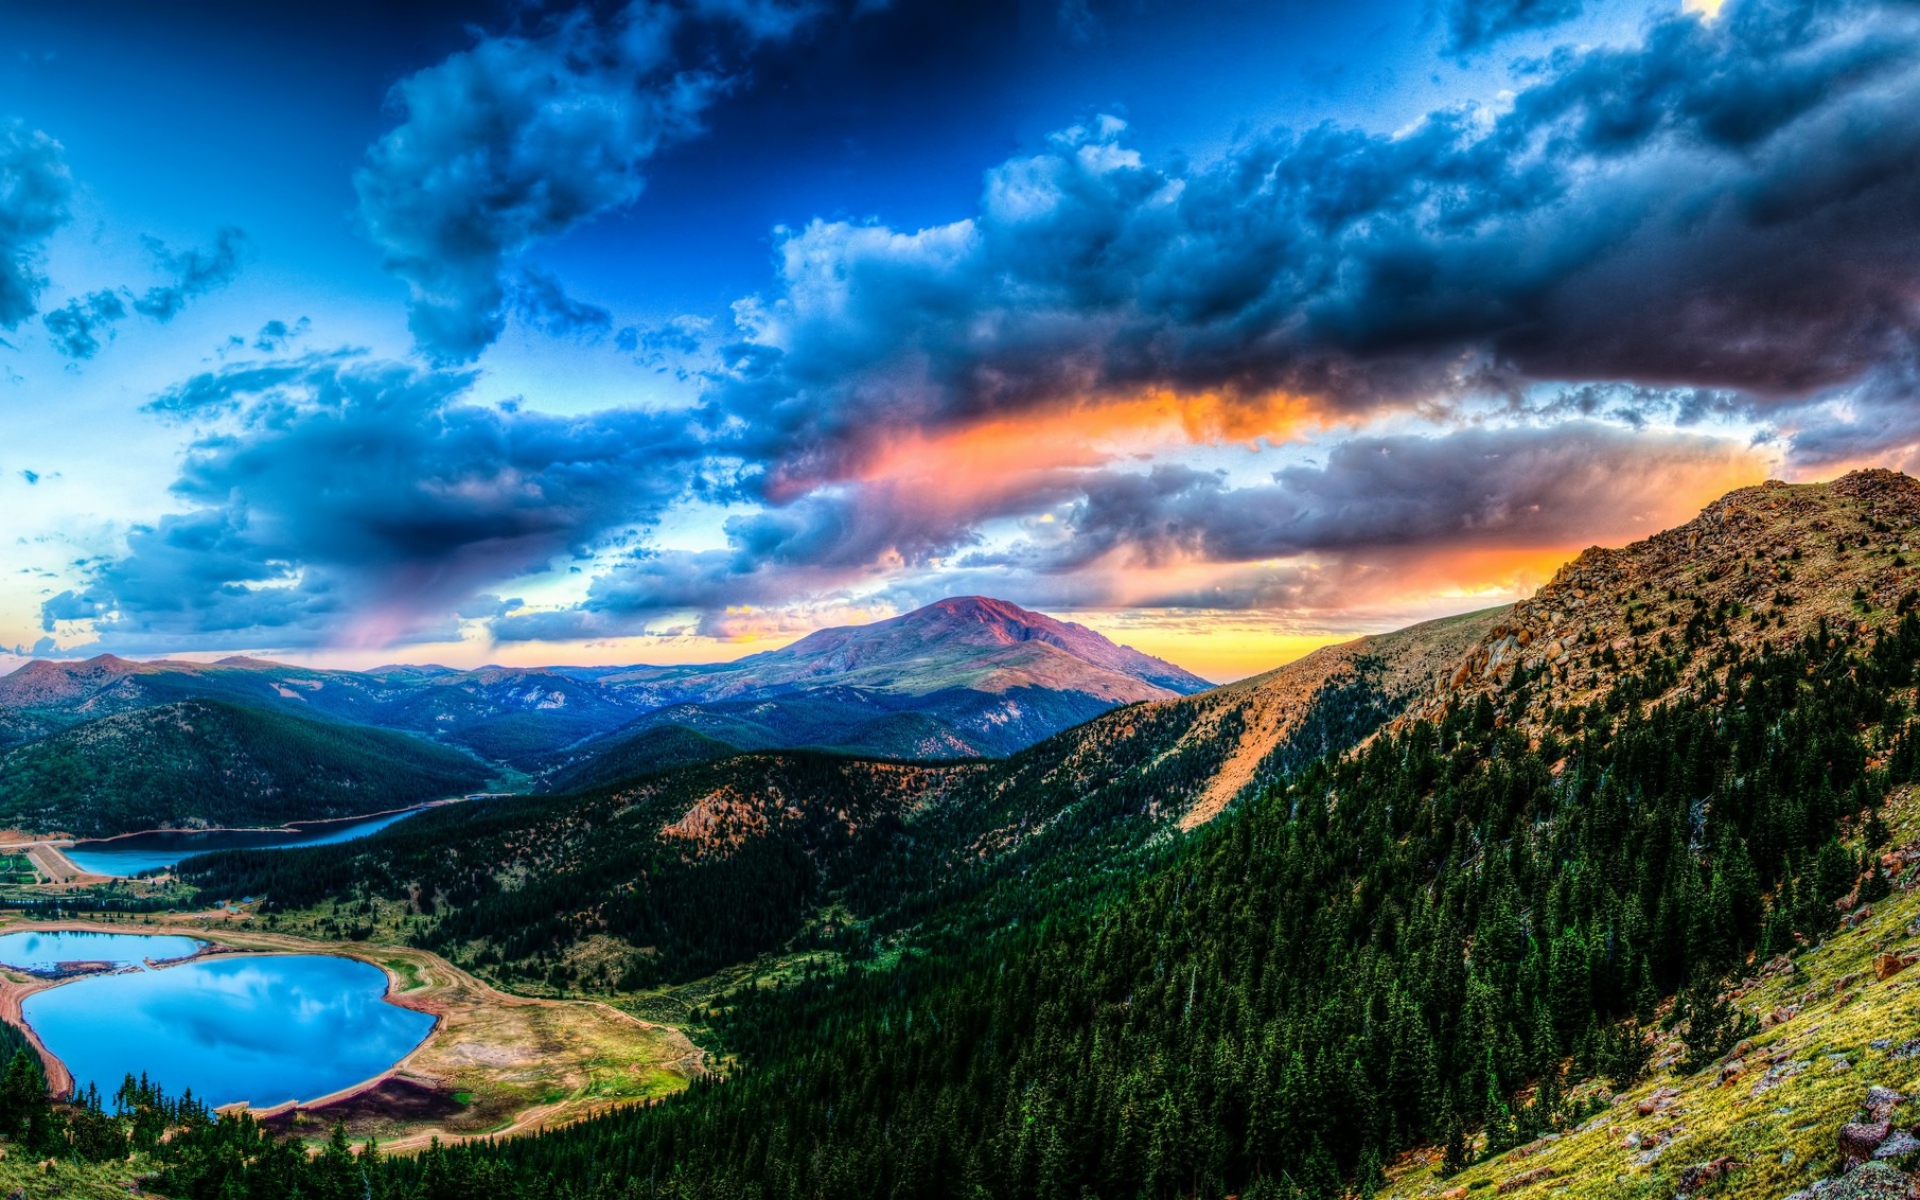 ws_Mountains_Forest_Lakes_Clouds_1920x1200.jpg